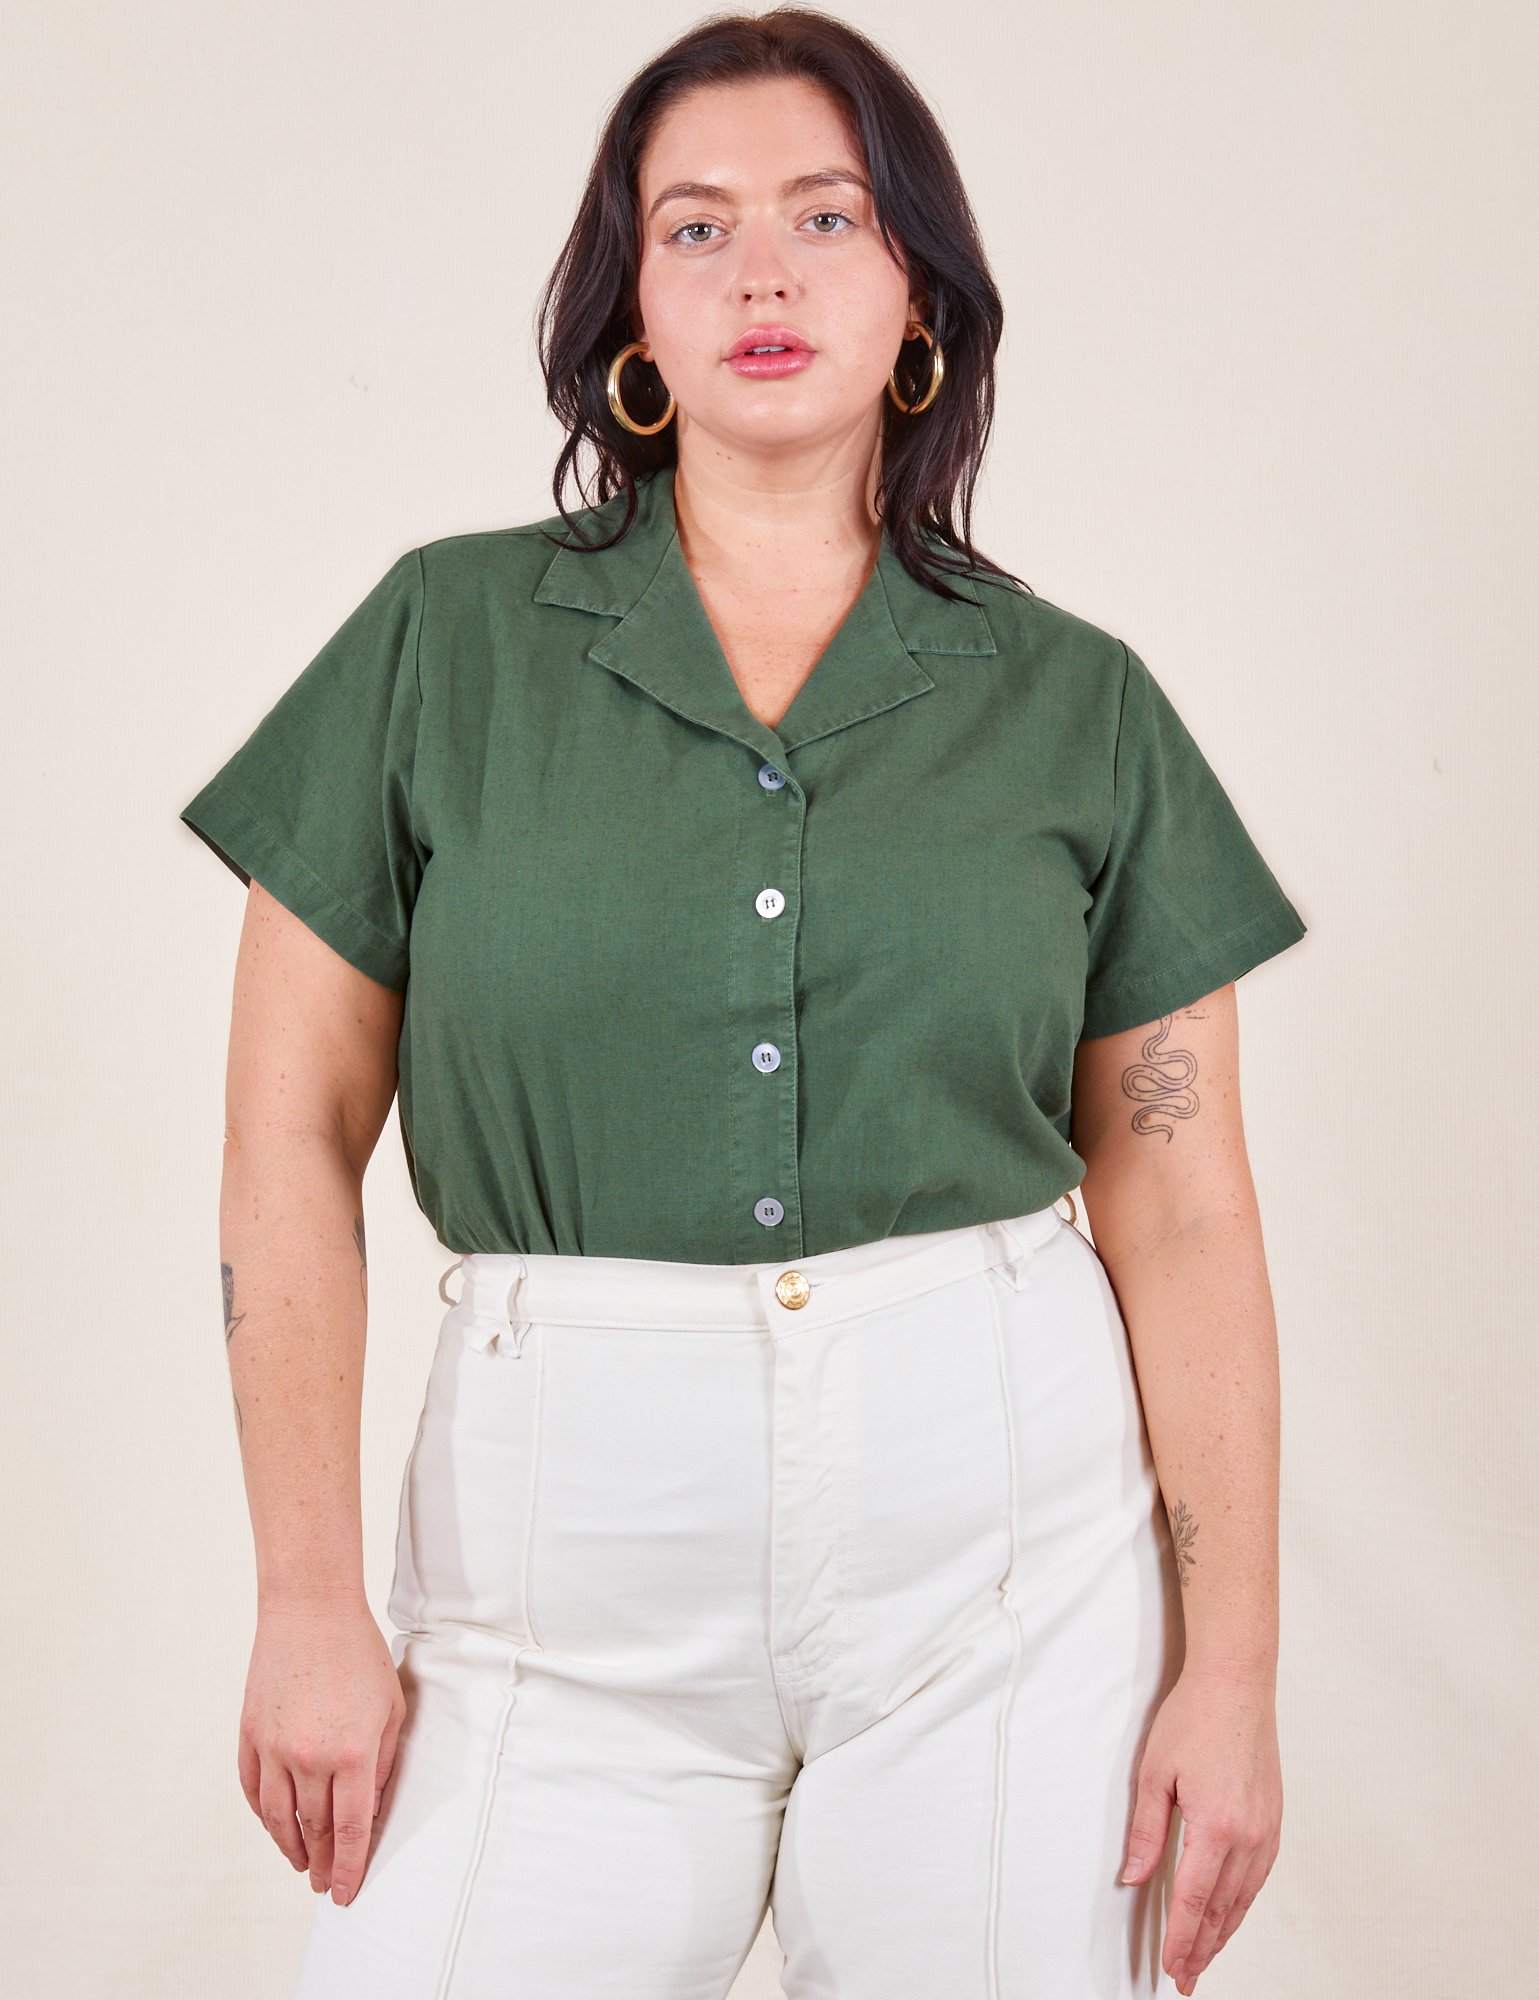 Faye is wearing M Pantry Button-Up in Dark Emerald Green tucked into vintage tee off-white Western Pants